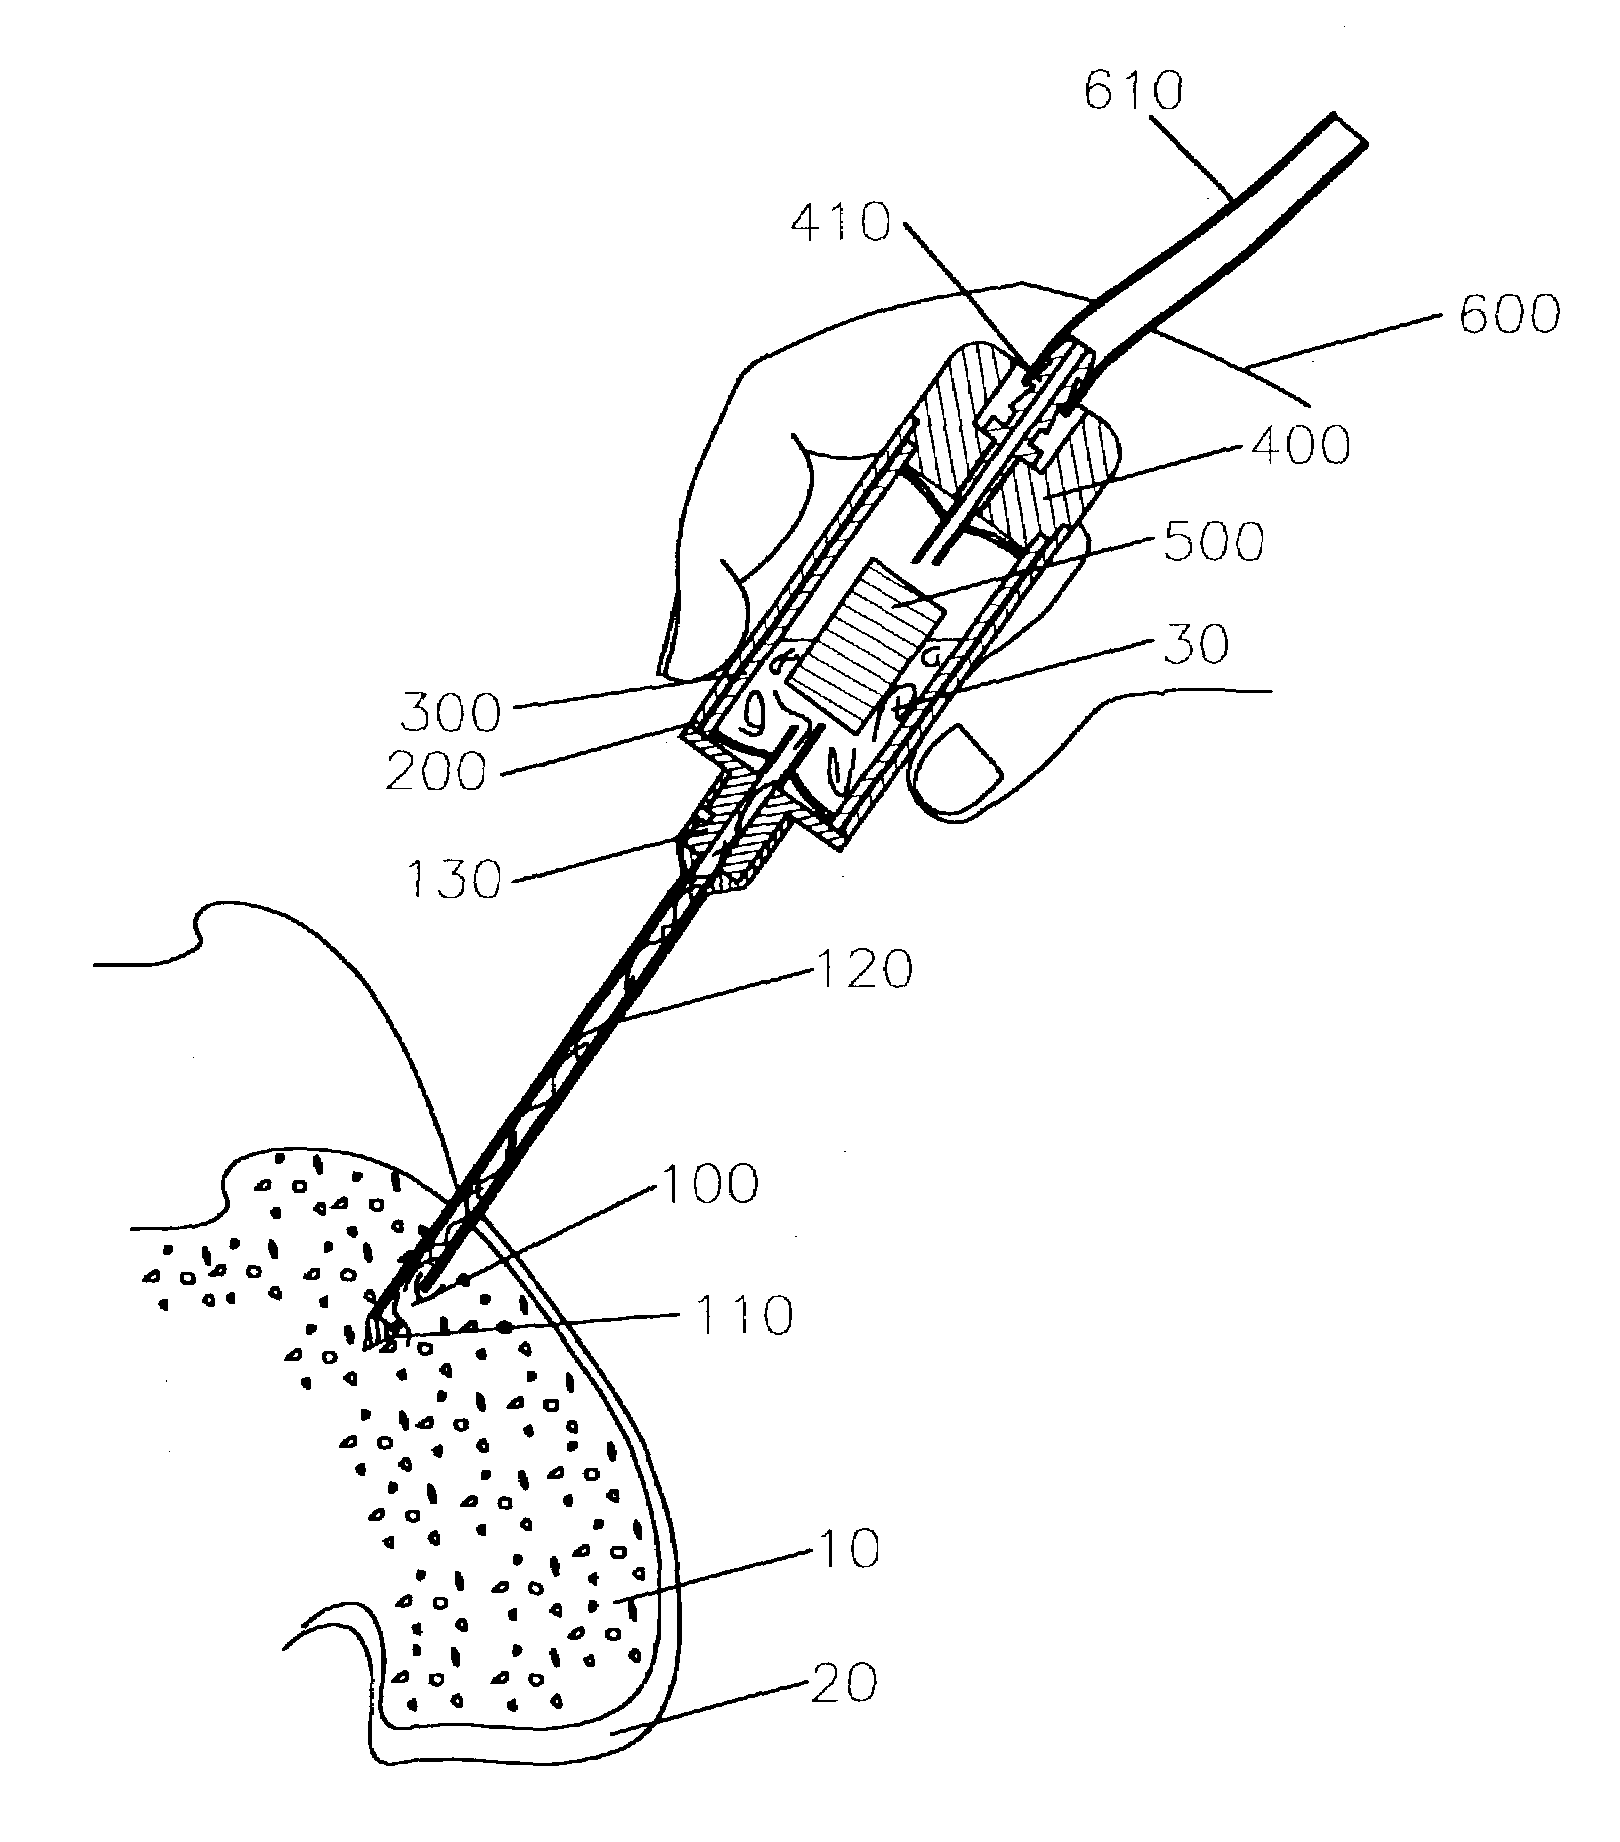 Bone marrow aspiration and biomaterial mixing system